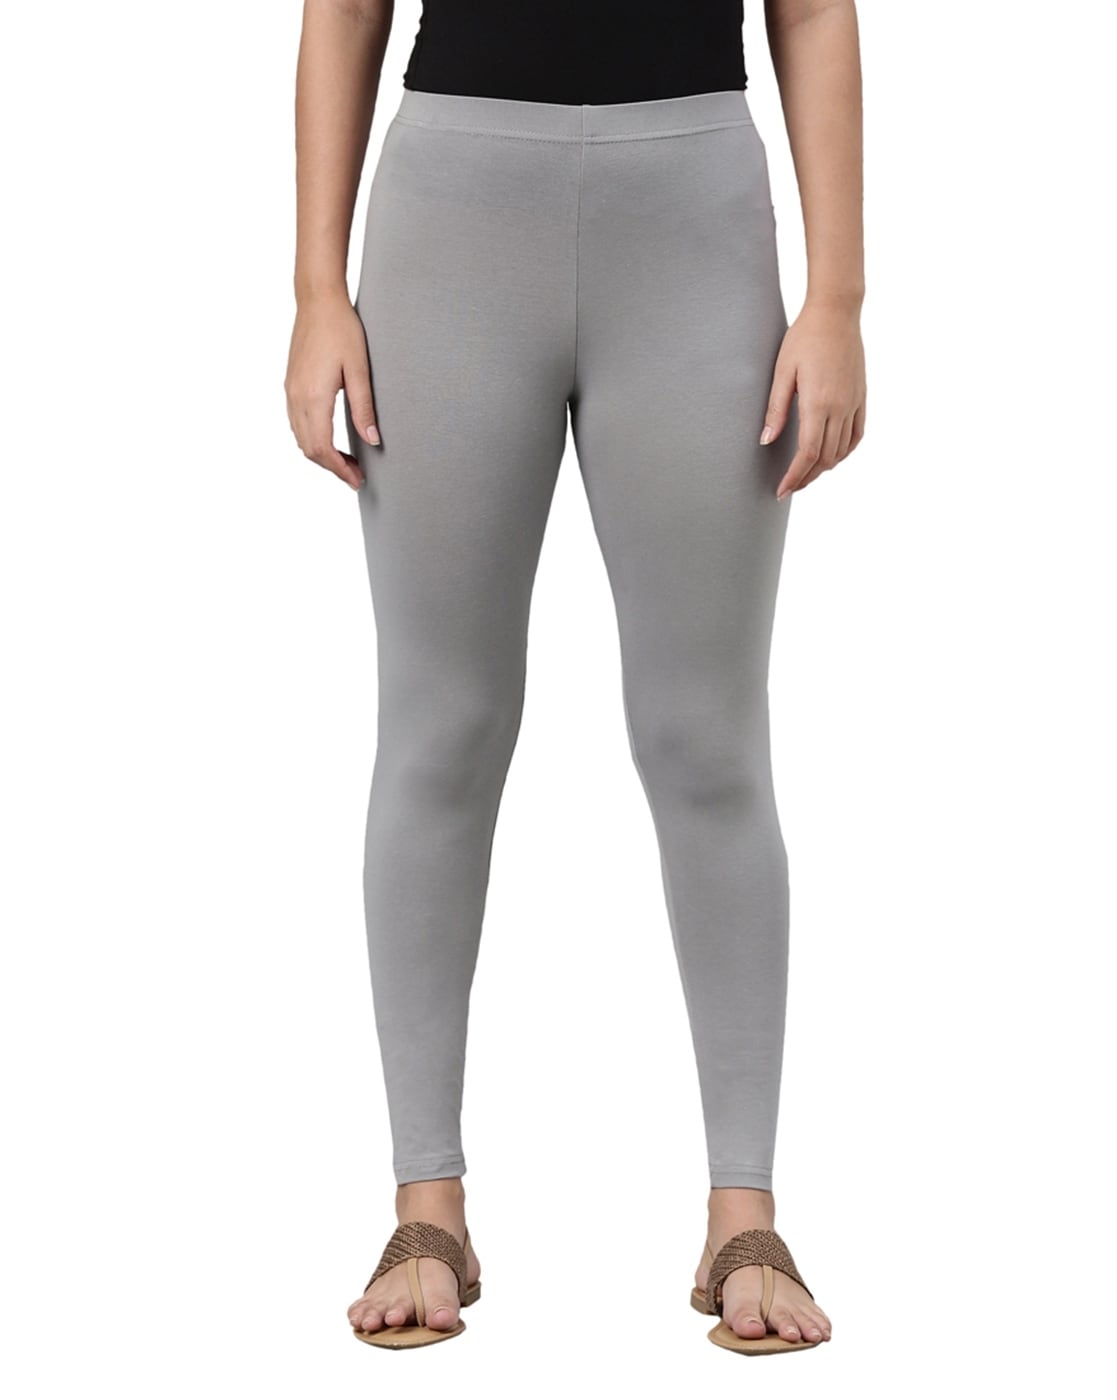 Ladies Comfort Fit Grey Color Legging at Rs 145 in Ghaziabad